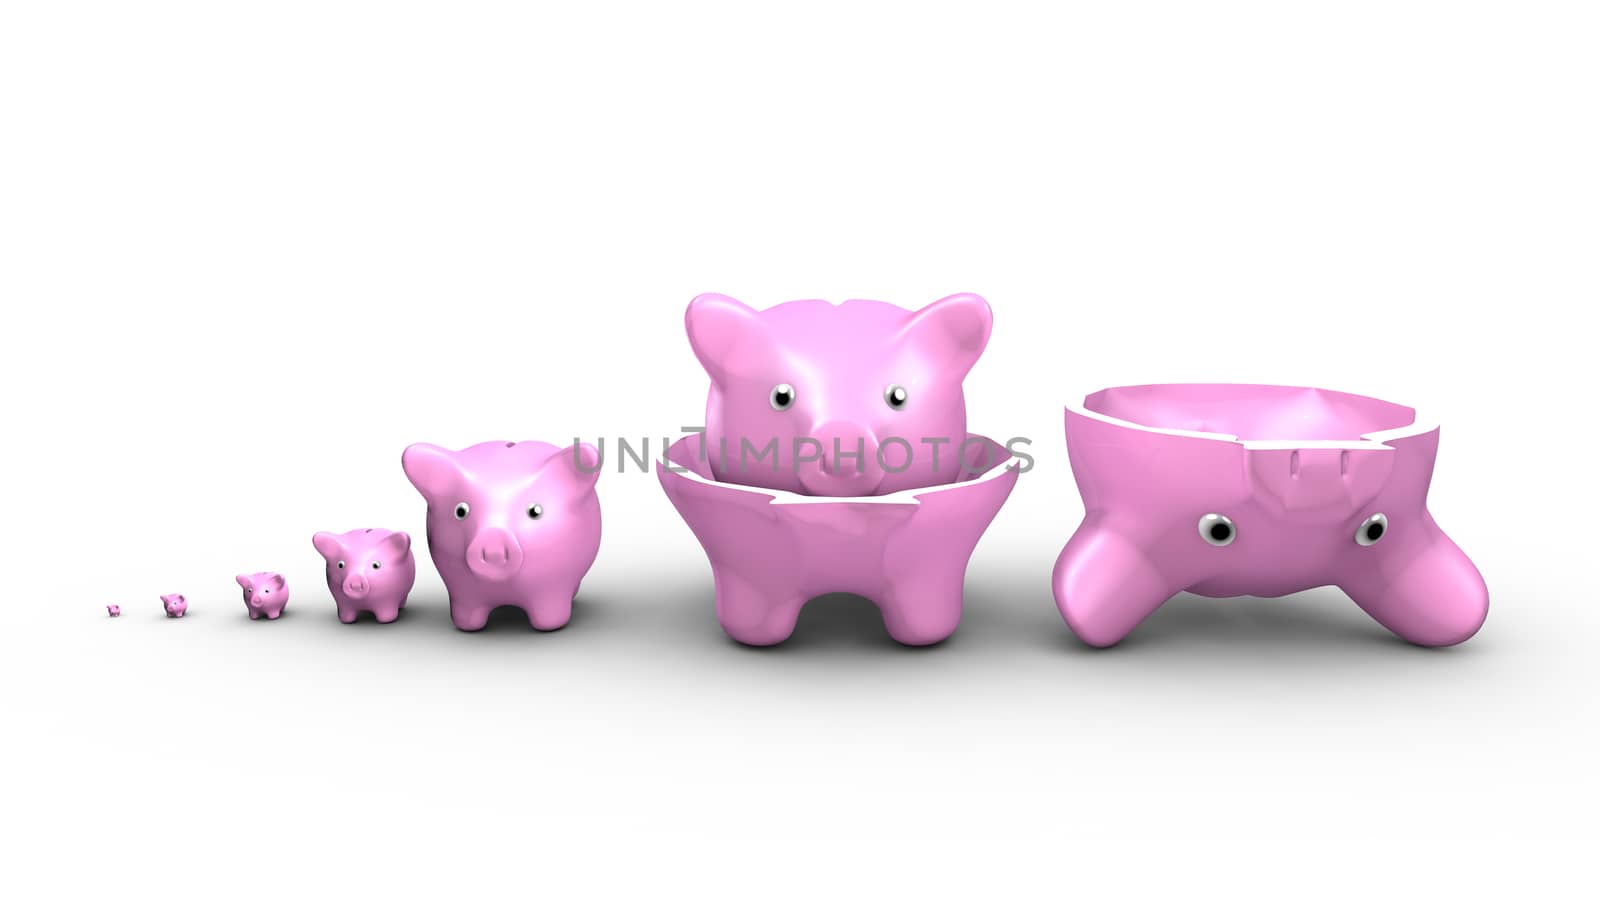 This illustration show a saving money concept. Piggy banks replace the Russian dolls.